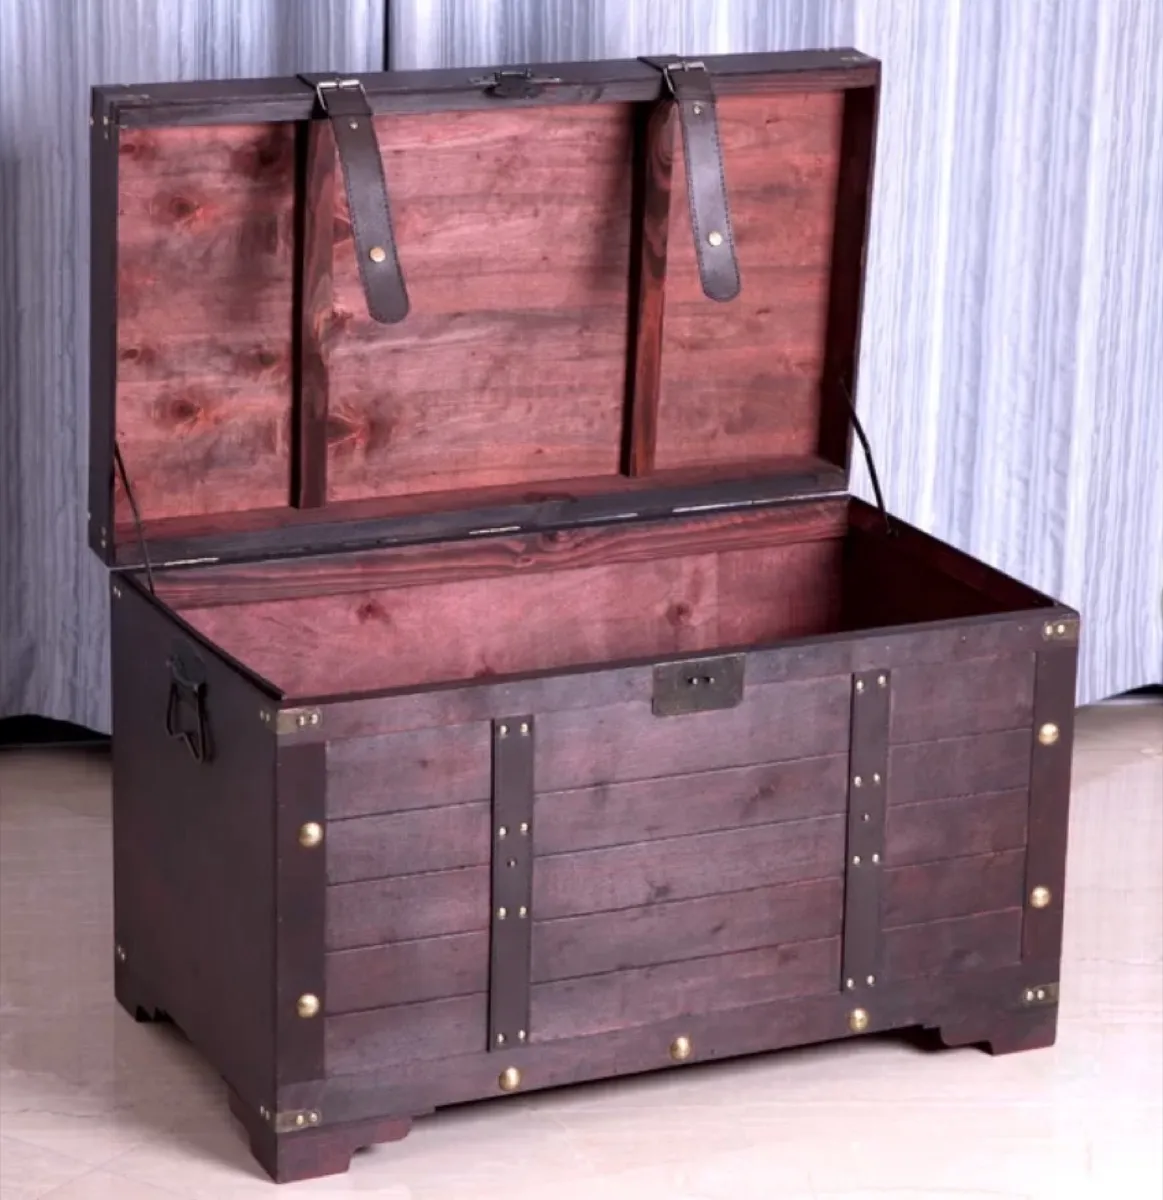 steamer trunk, old fashioned home items